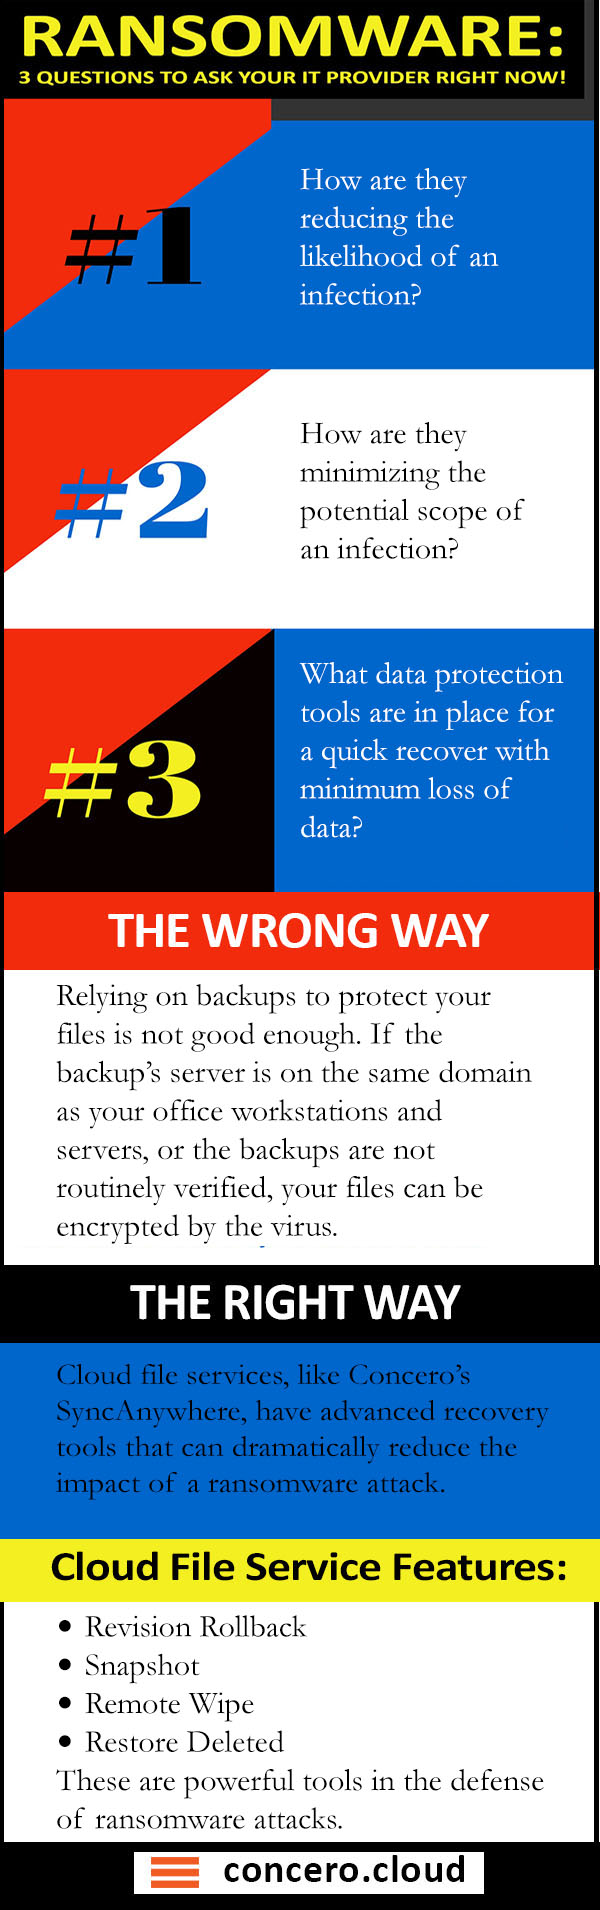 ransomware 3 questions infographic 600 x 1900